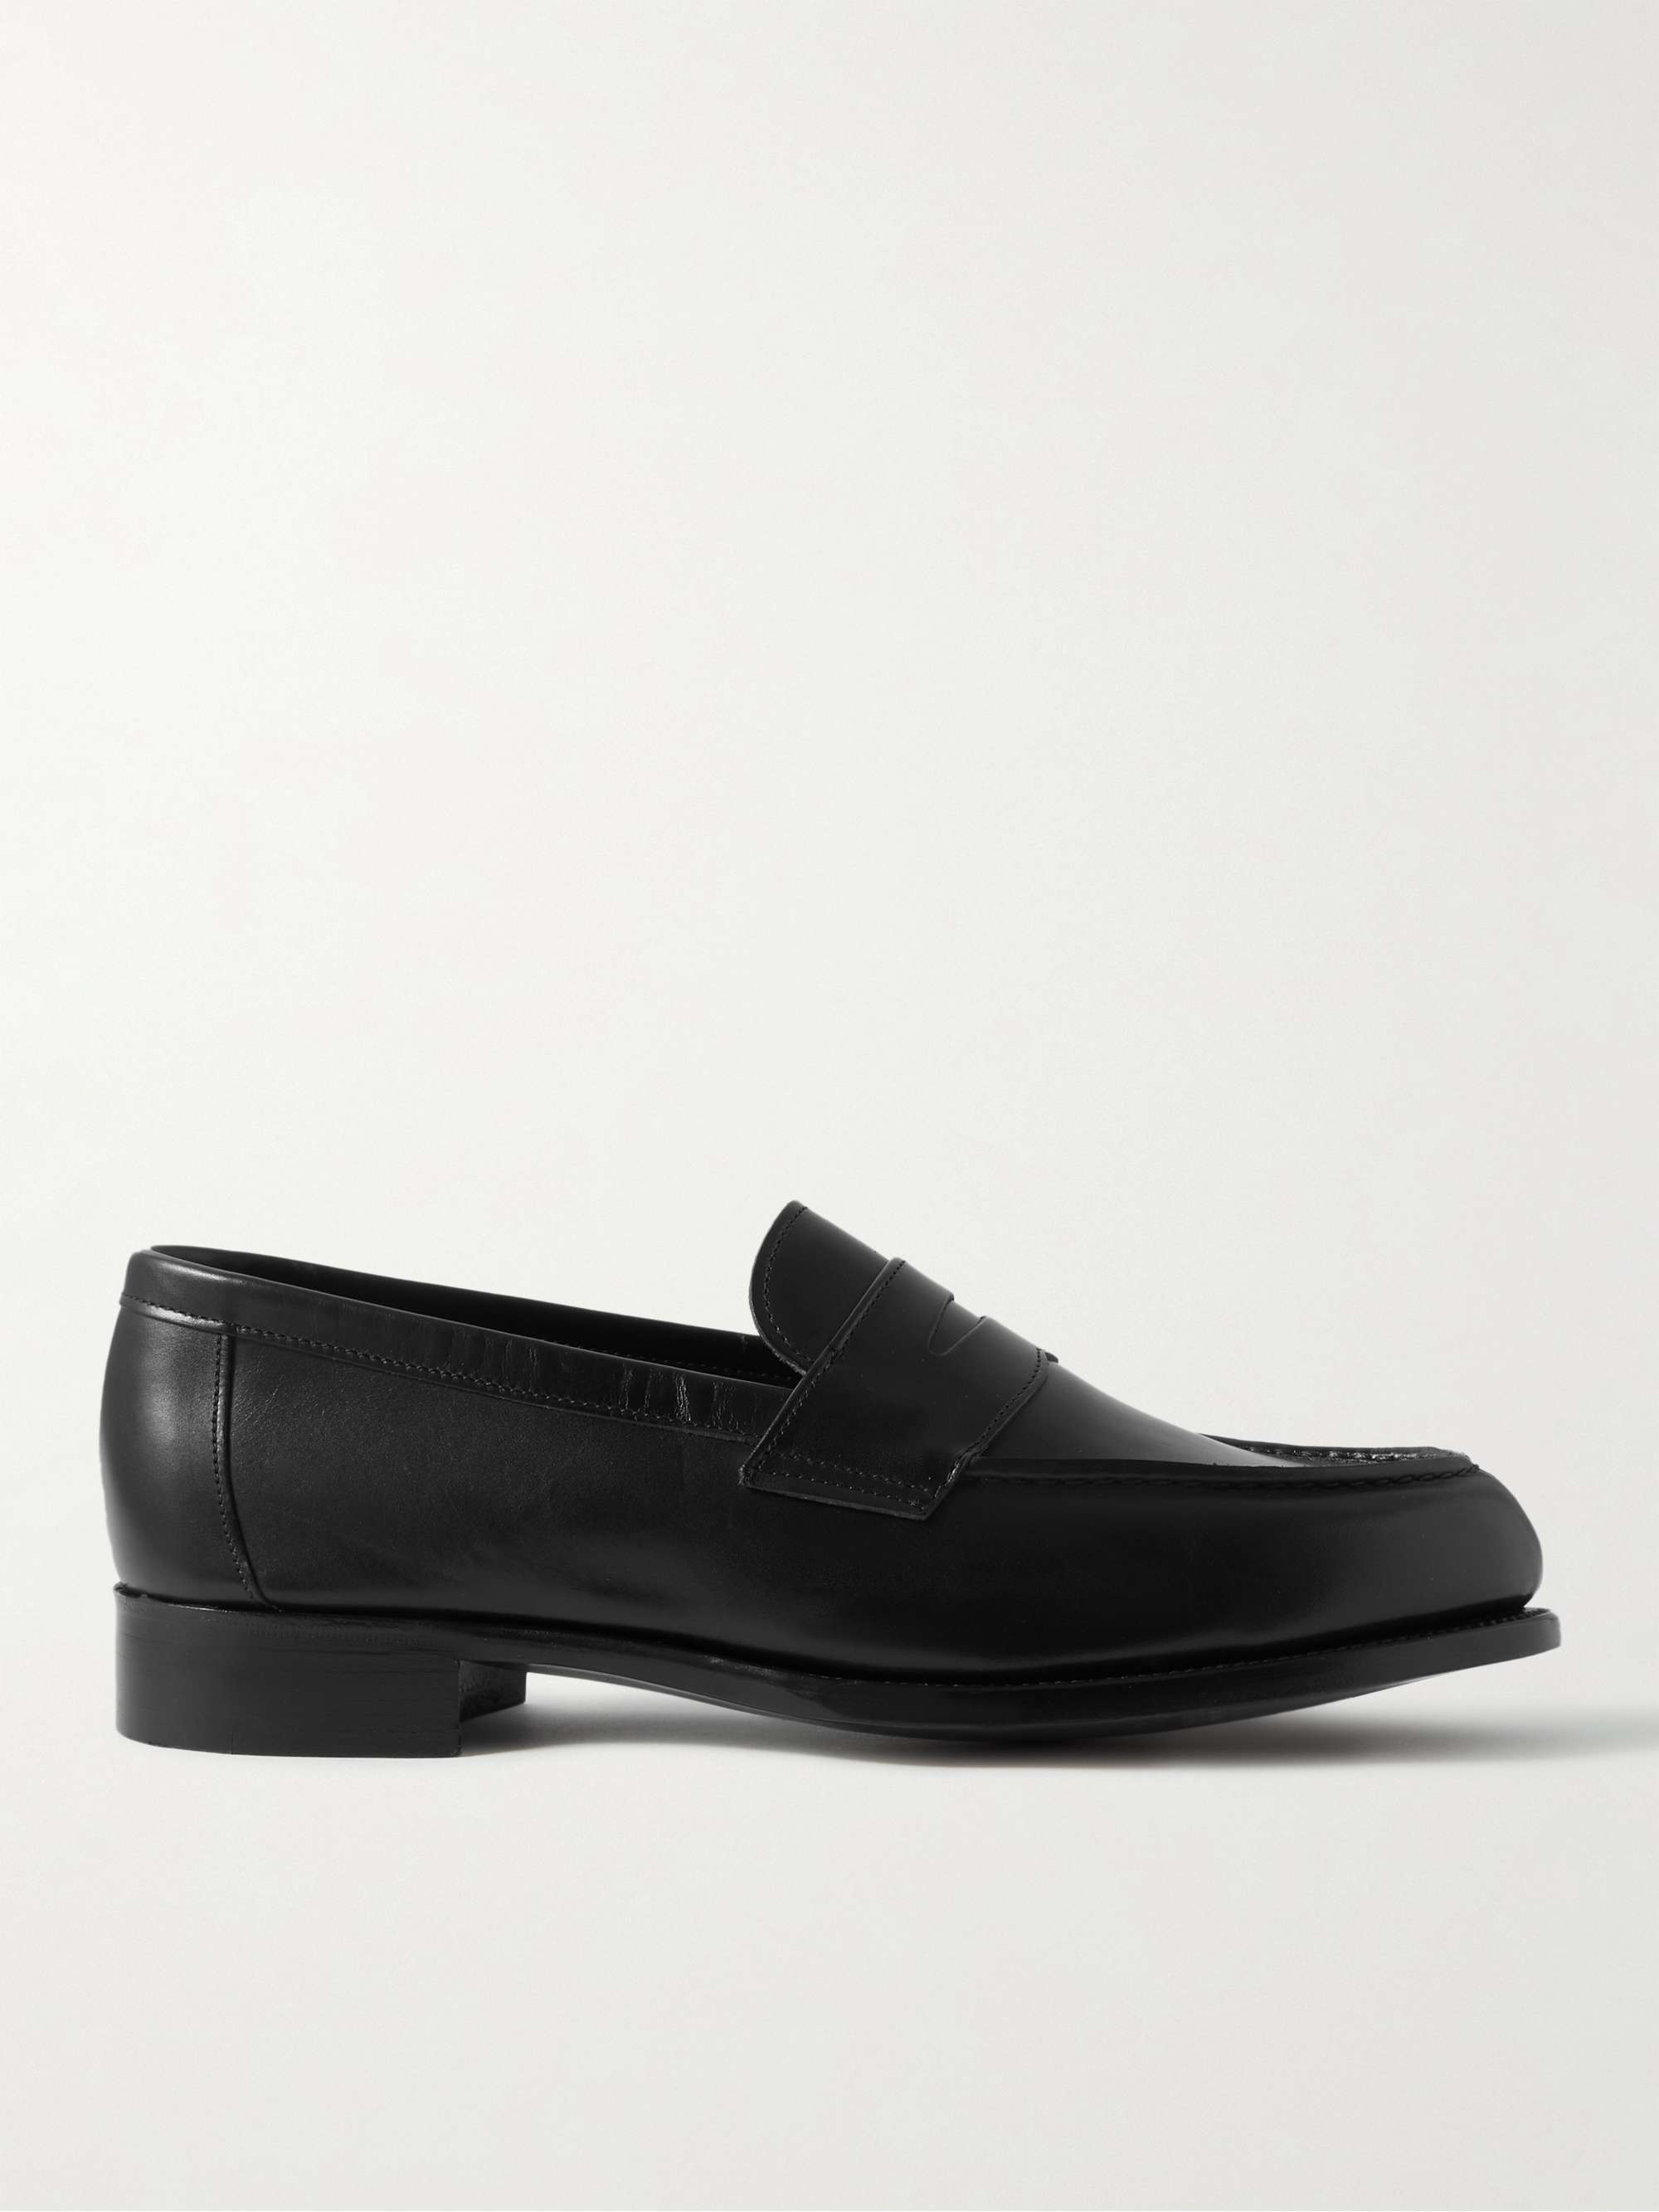 GEORGE CLEVERLEY Cannes Leather Penny Loafers